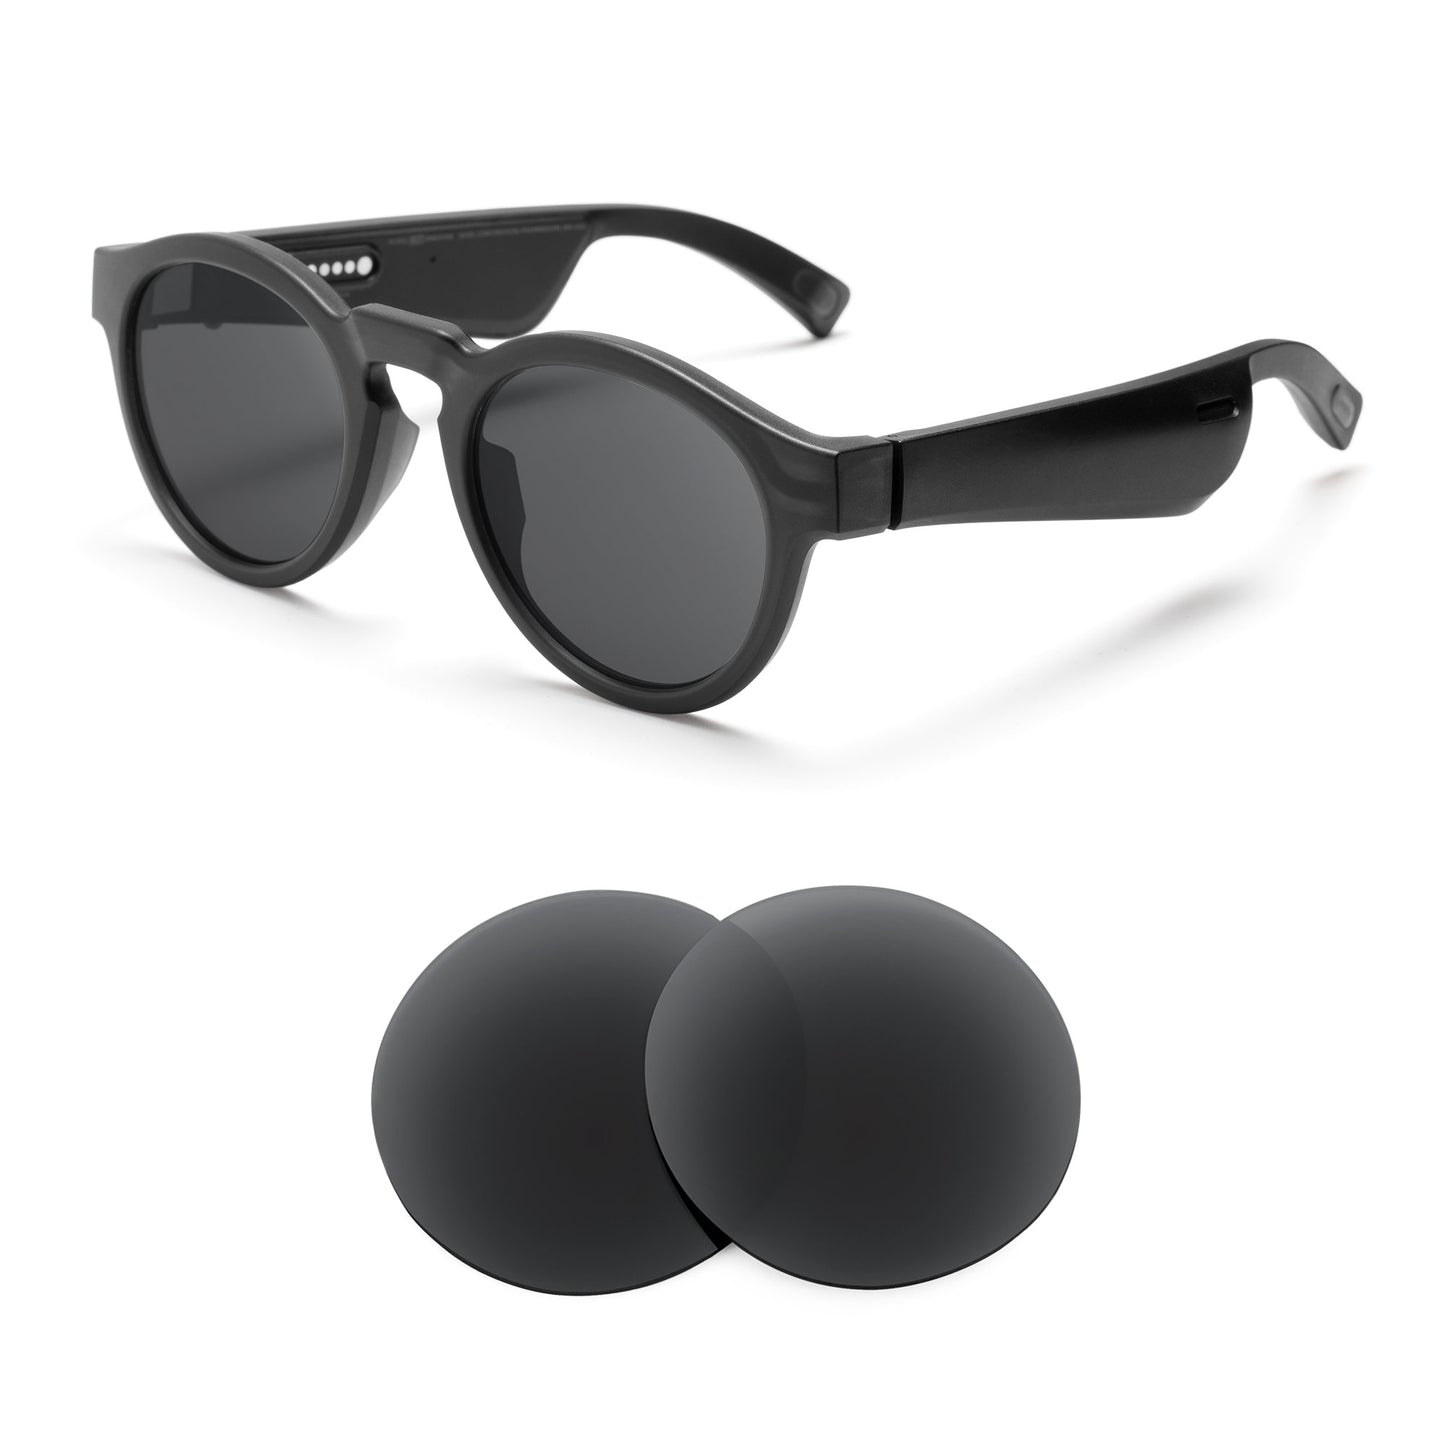 Bose Rondo S/M sunglasses with replacement lenses